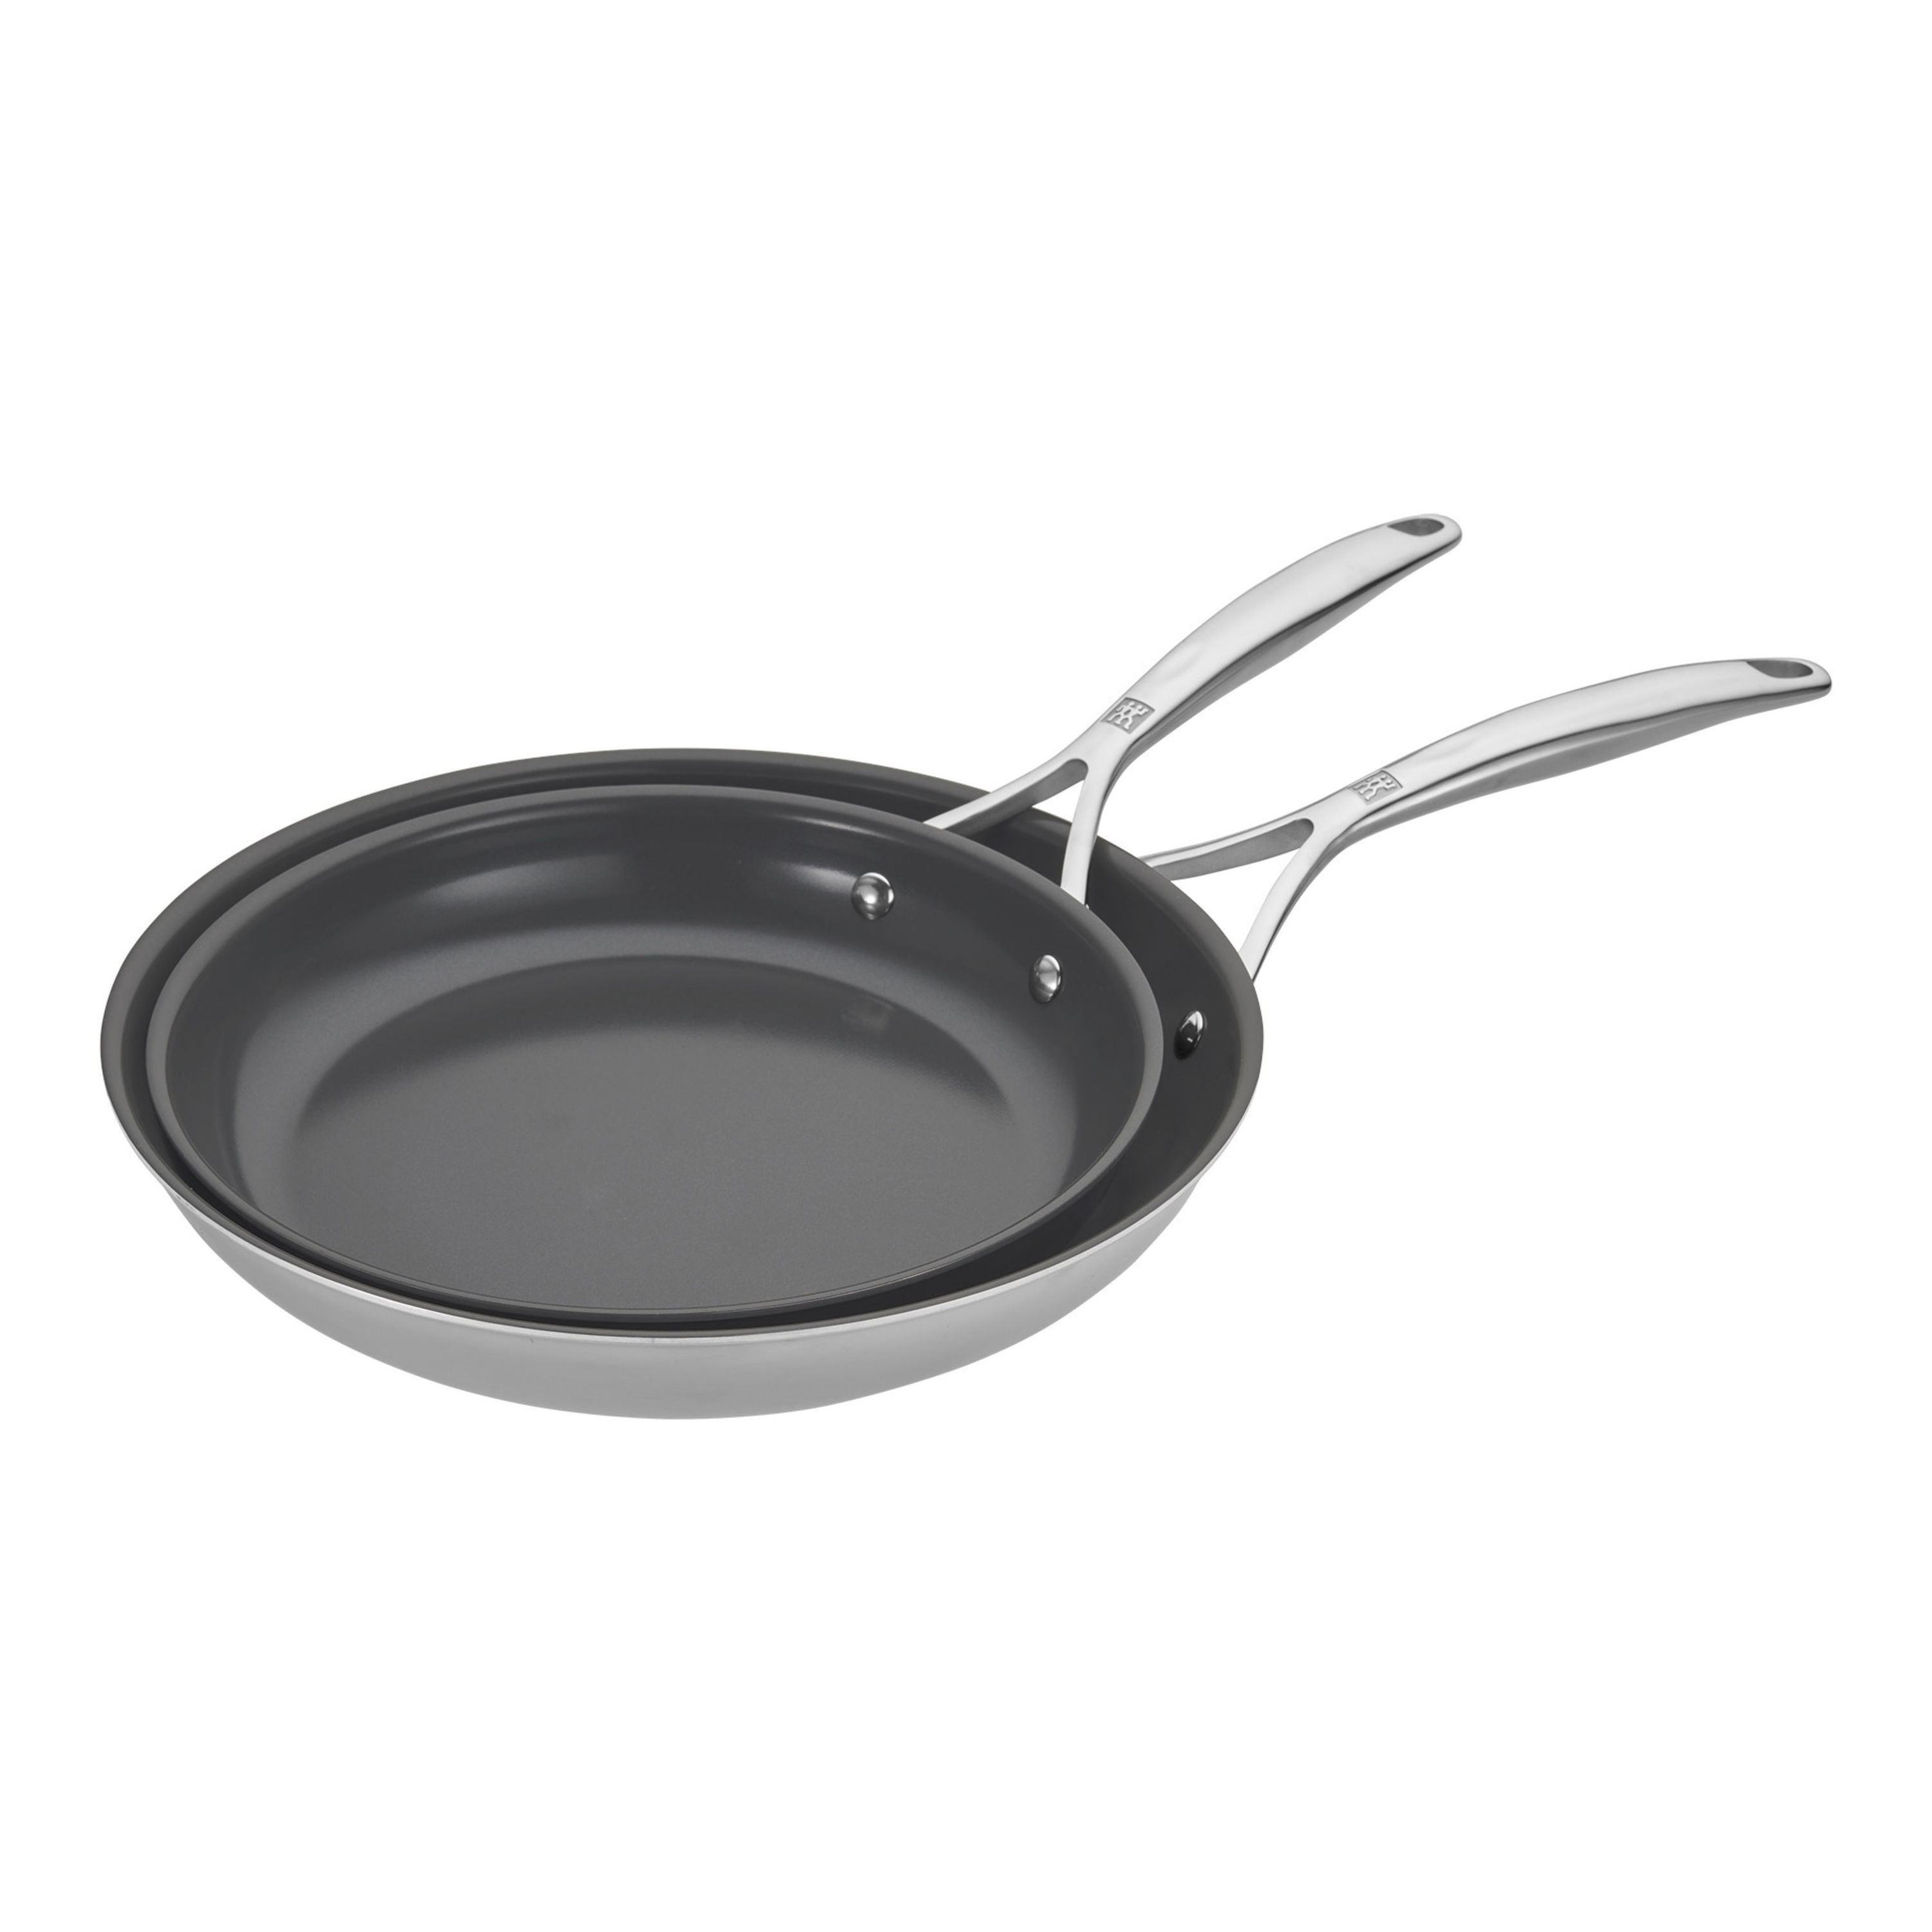 ZWILLING Energy Plus 2-pc, 18/10 Stainless Steel, Non-stick, Frying pan set